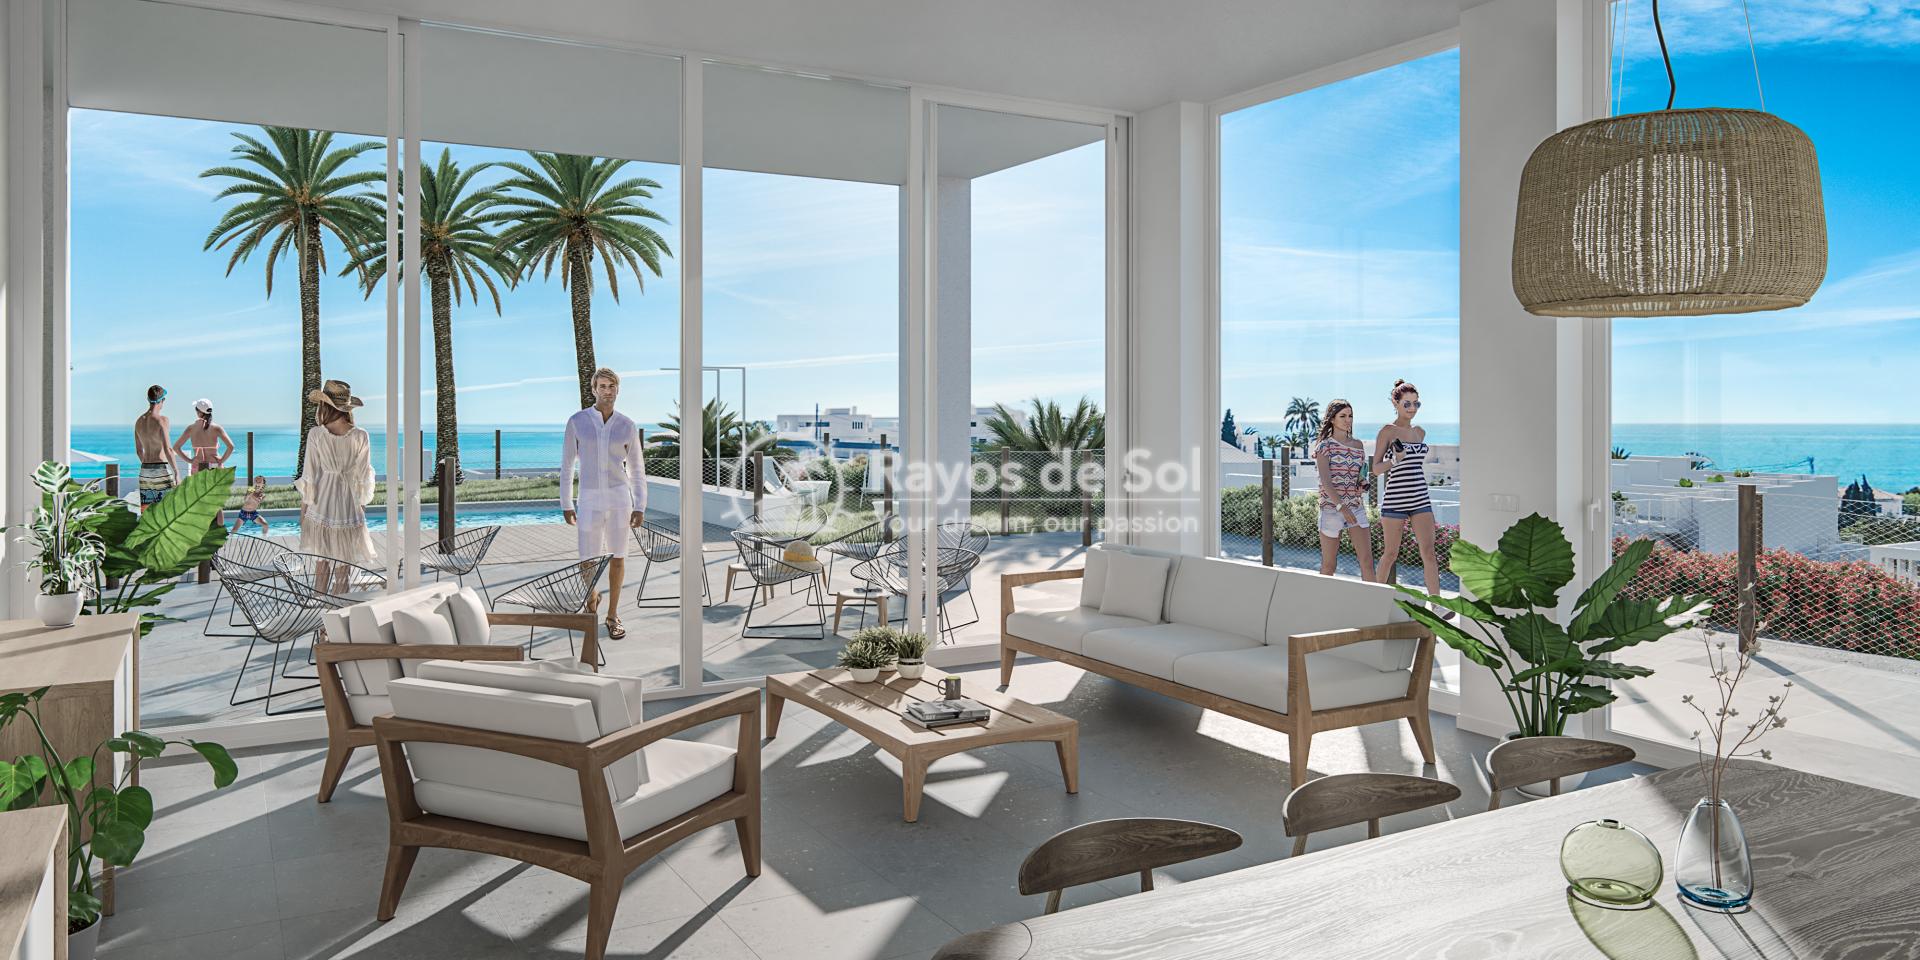 Magnificent apartment with seaview  in Villajoyosa, Costa Blanca (VIRGBB3-3B) - 12